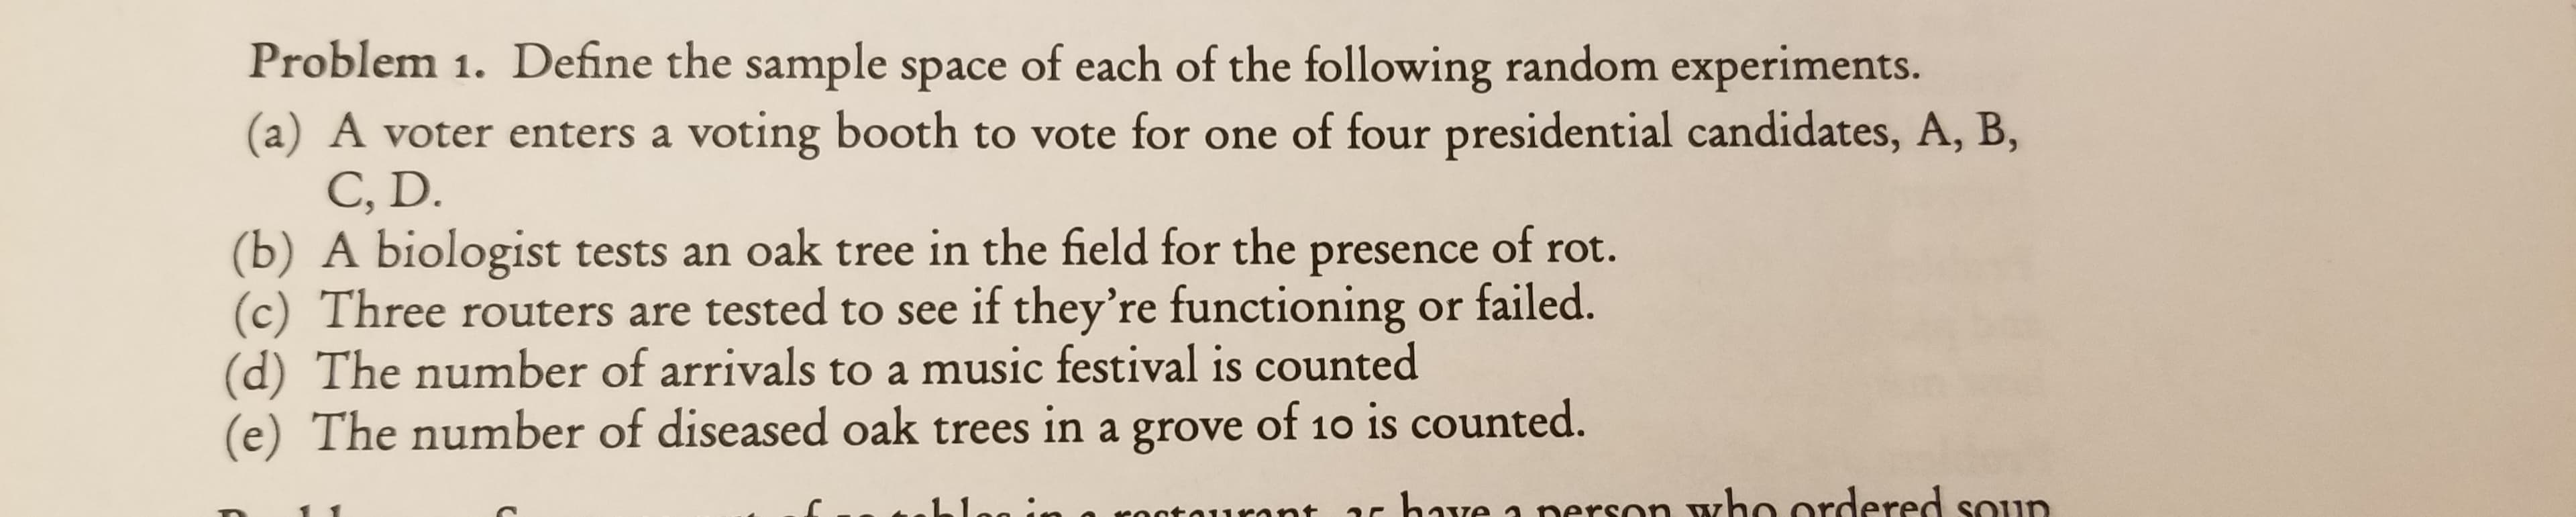 Problem 1. Define the sample space of each of the following random experiments.
(a) A voter enters a voting booth to vote for one of four presidential candidates, A, B,
C, D
(b) A biologist tests an oak tree in the field for the presence of rot.
Three routers are tested to see if they're functioning or failed.
(d) The number of arrivals to a music festival is counted
(e) The number of diseased oak trees in a grove of 10 is counted.
a nerson who ordered soun
have
onta1sant
